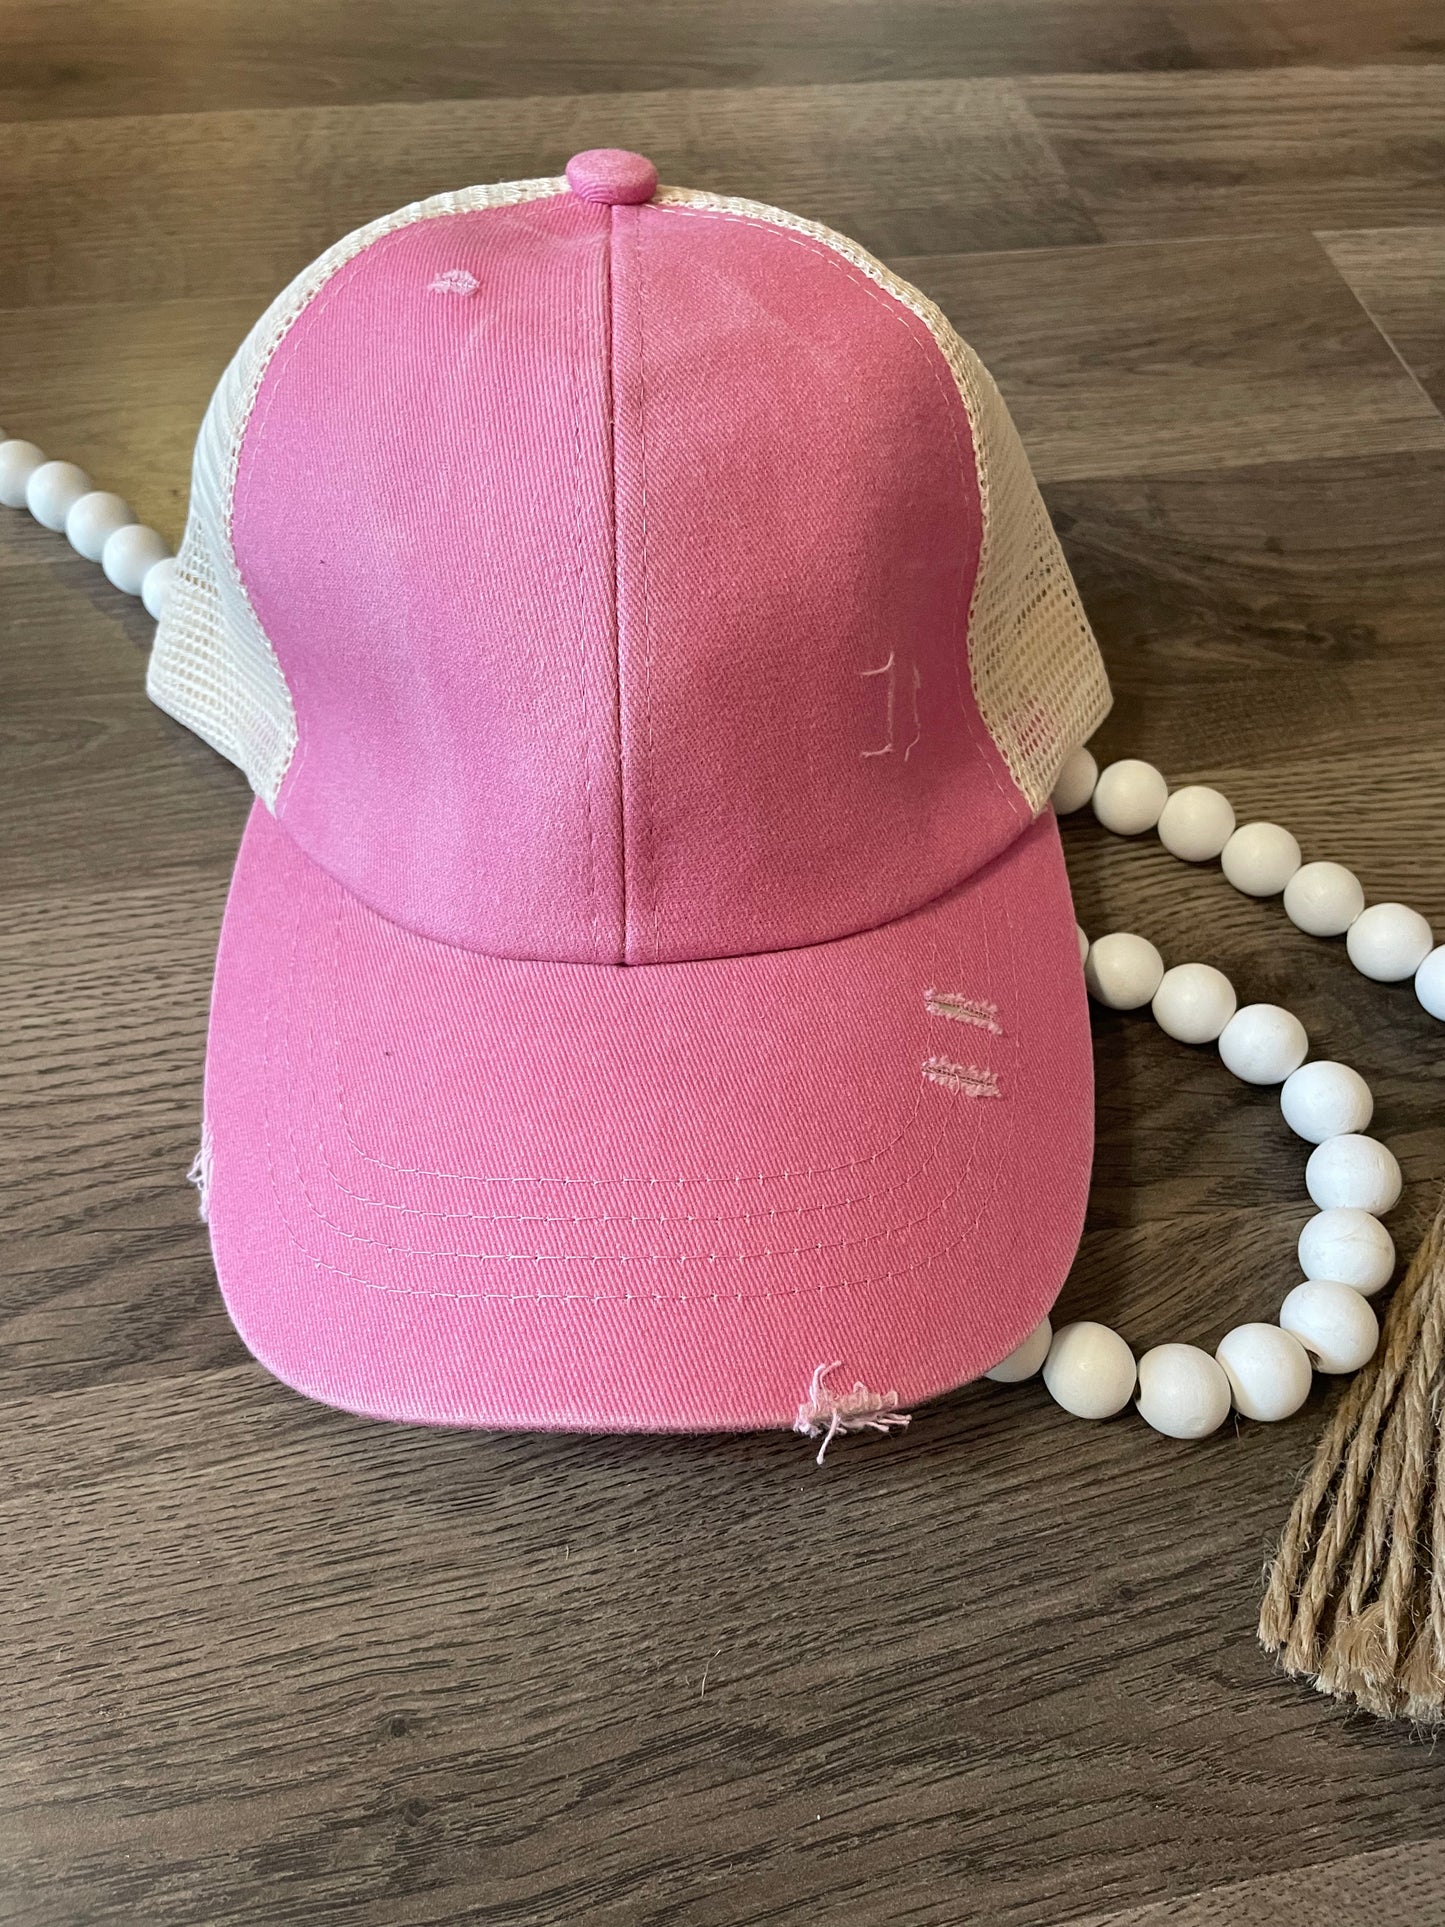 Distressed pink criss cross hat